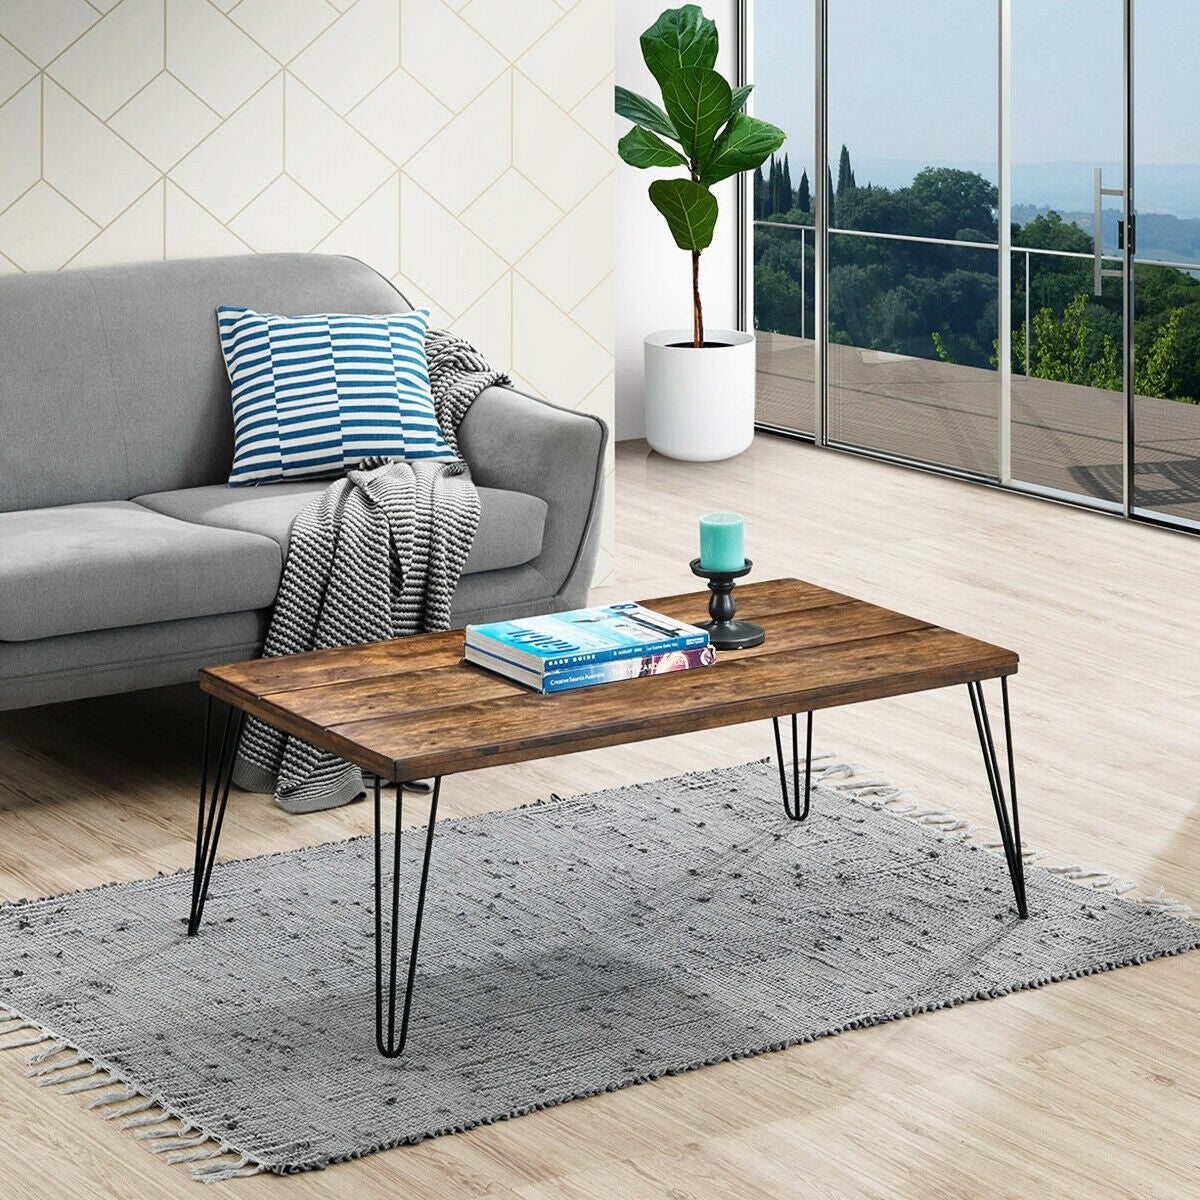 Rustic Coffee Table with Wooden Top and Metal Legs